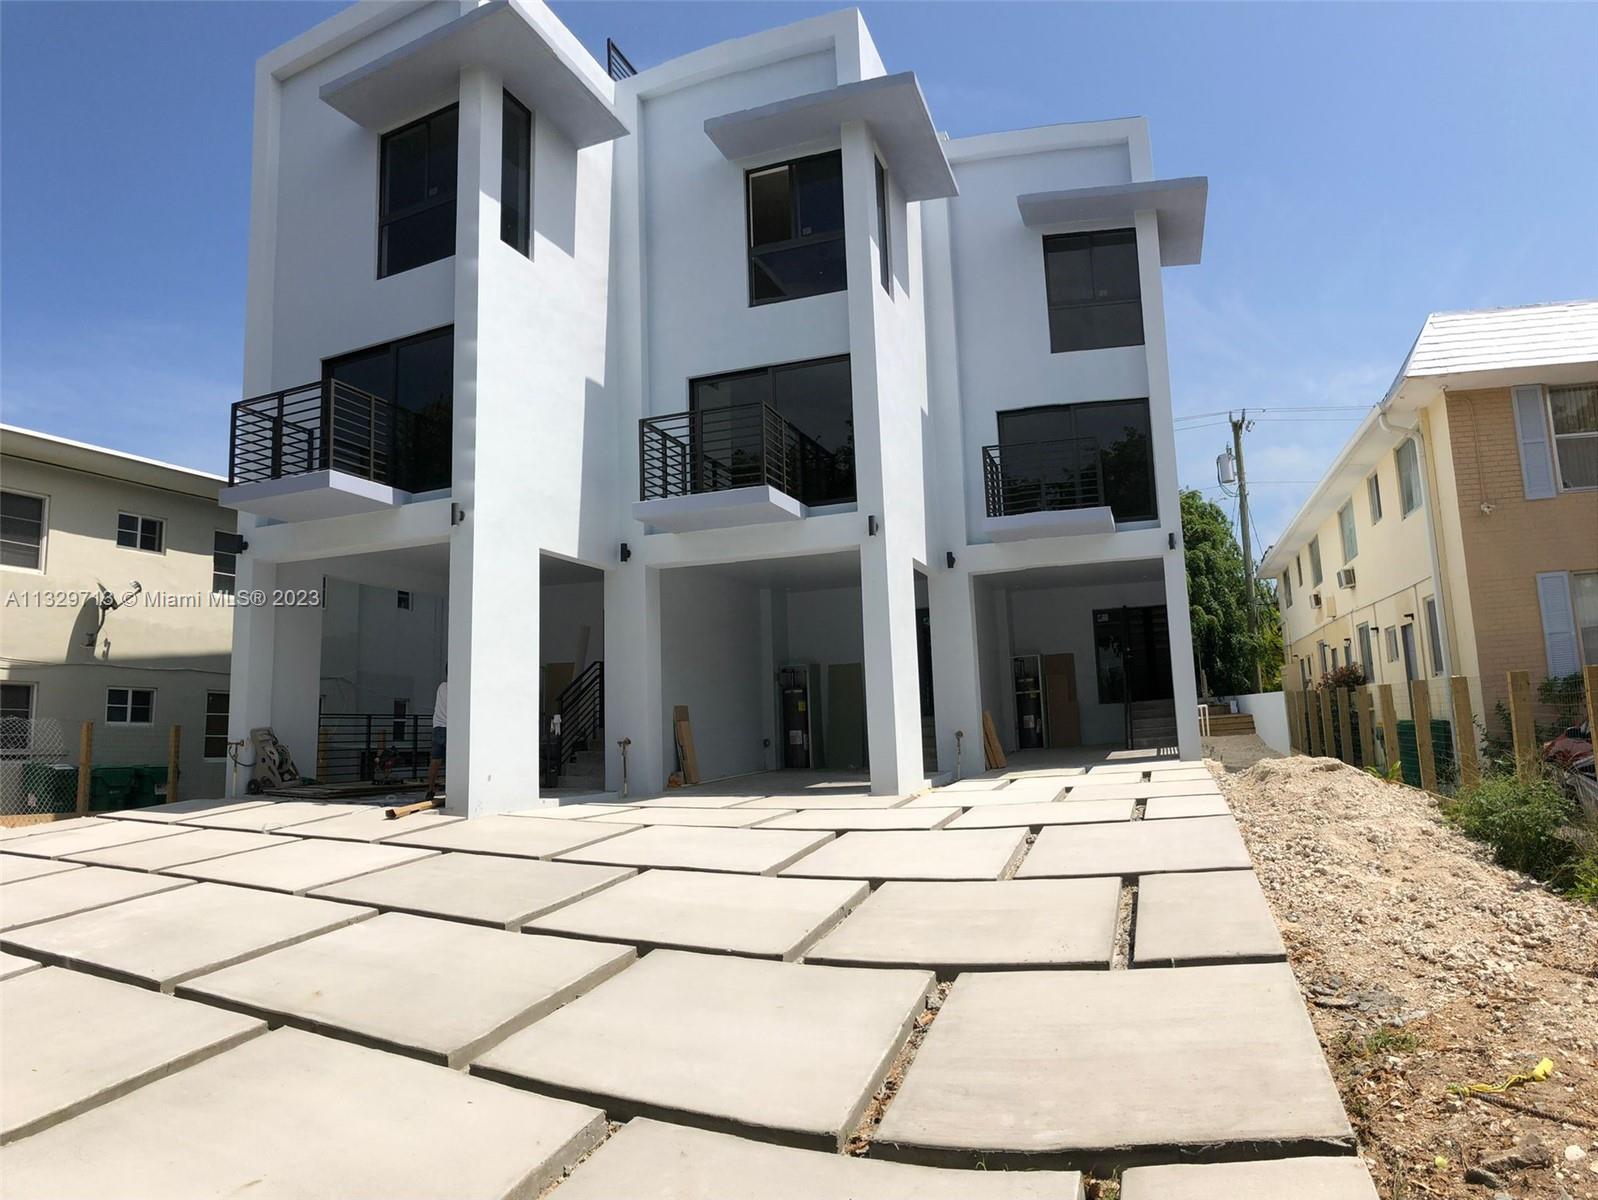 Stunning brand new townhouses in Normandy Isles. A few minutes from the beaches, golf course, dining & shopping ! Each townhouse has 3 bedrooms and 3 bathrooms, private pool and terrasse rooftop. Perfect for big family or investment. Serenity and tranquility in one of the most exclusive gated communities in Miami Beach.